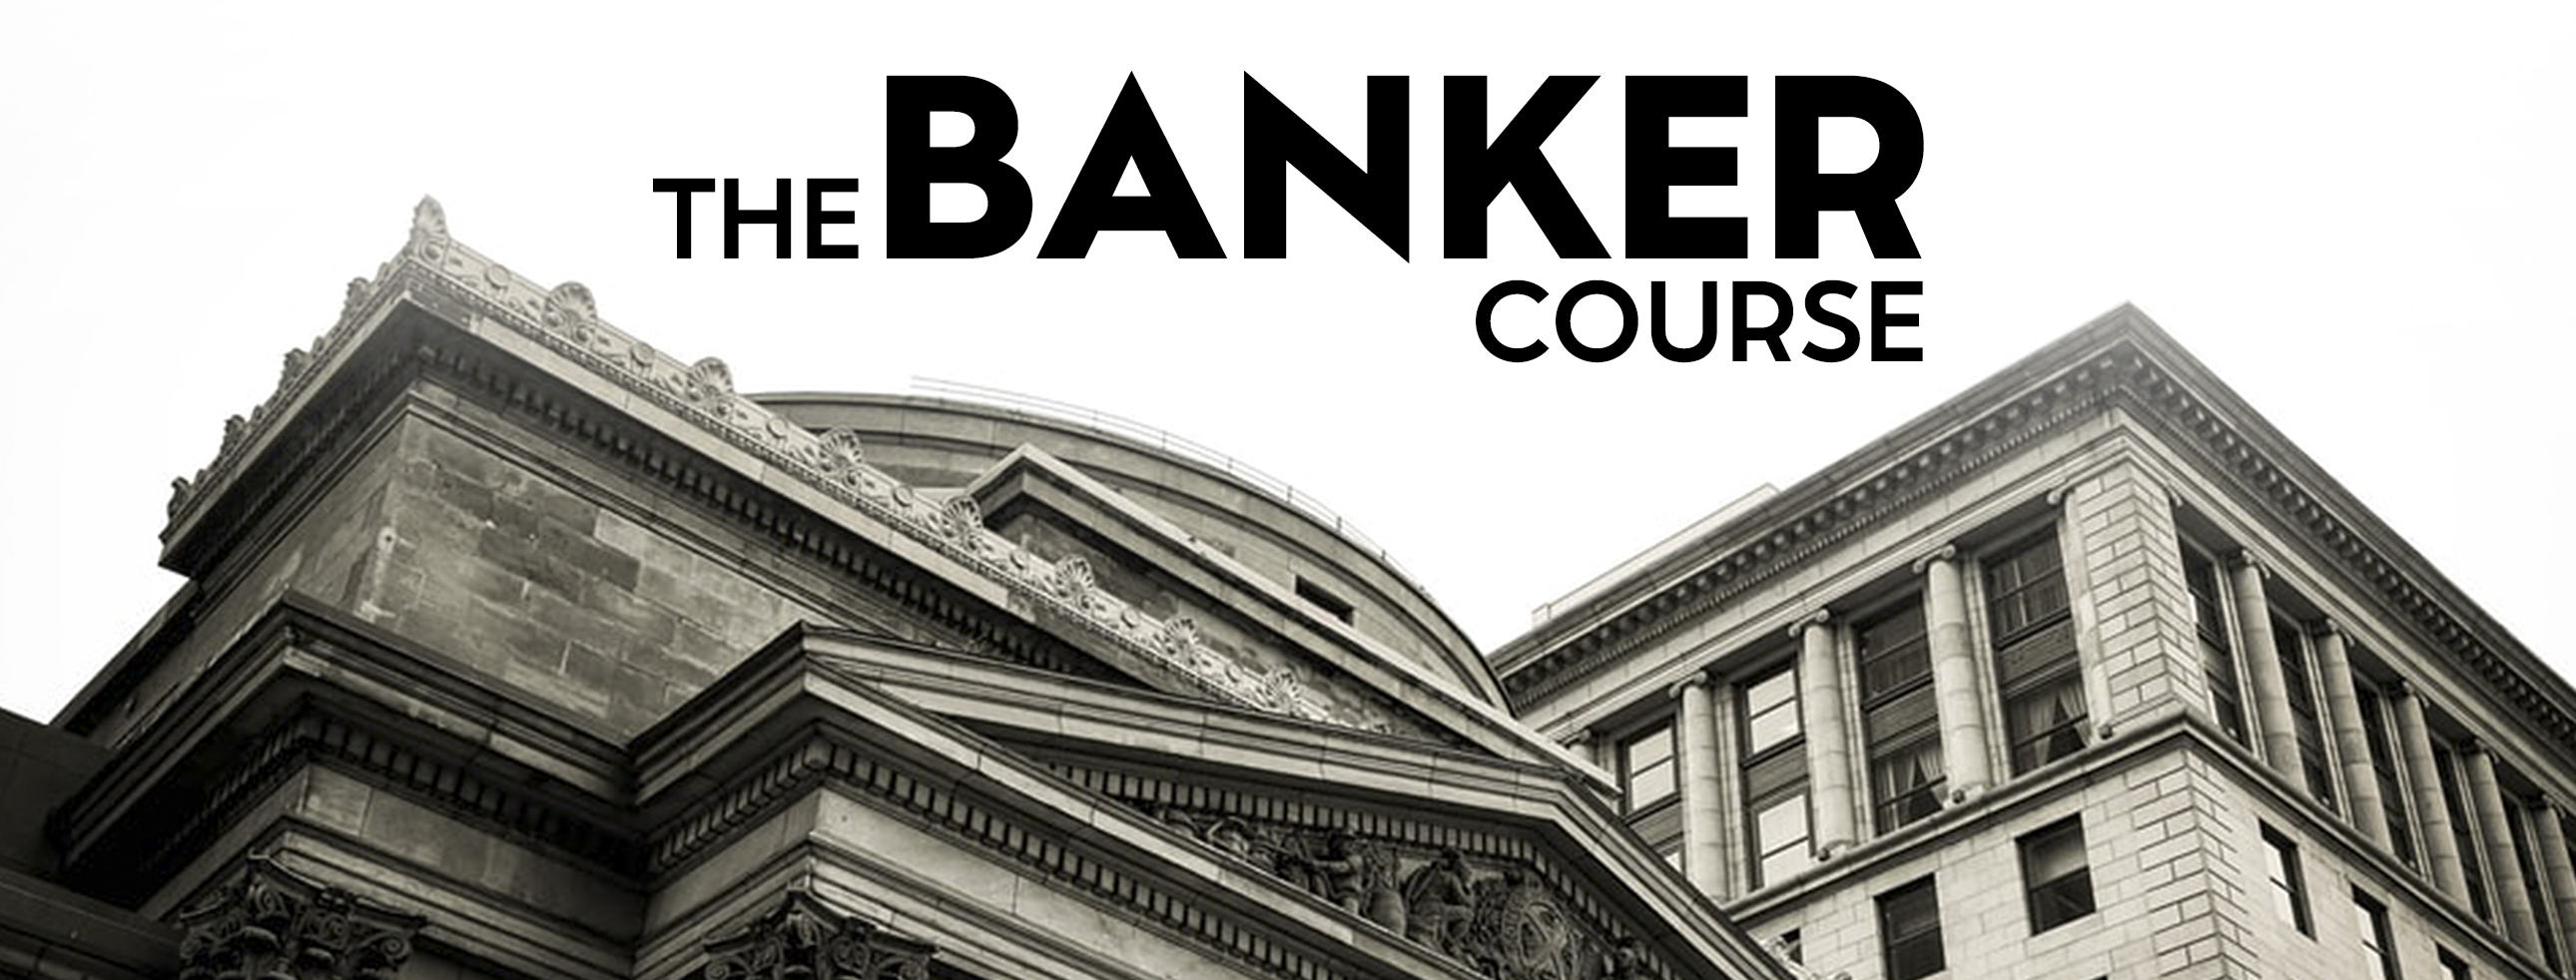 BANKING-COURSE